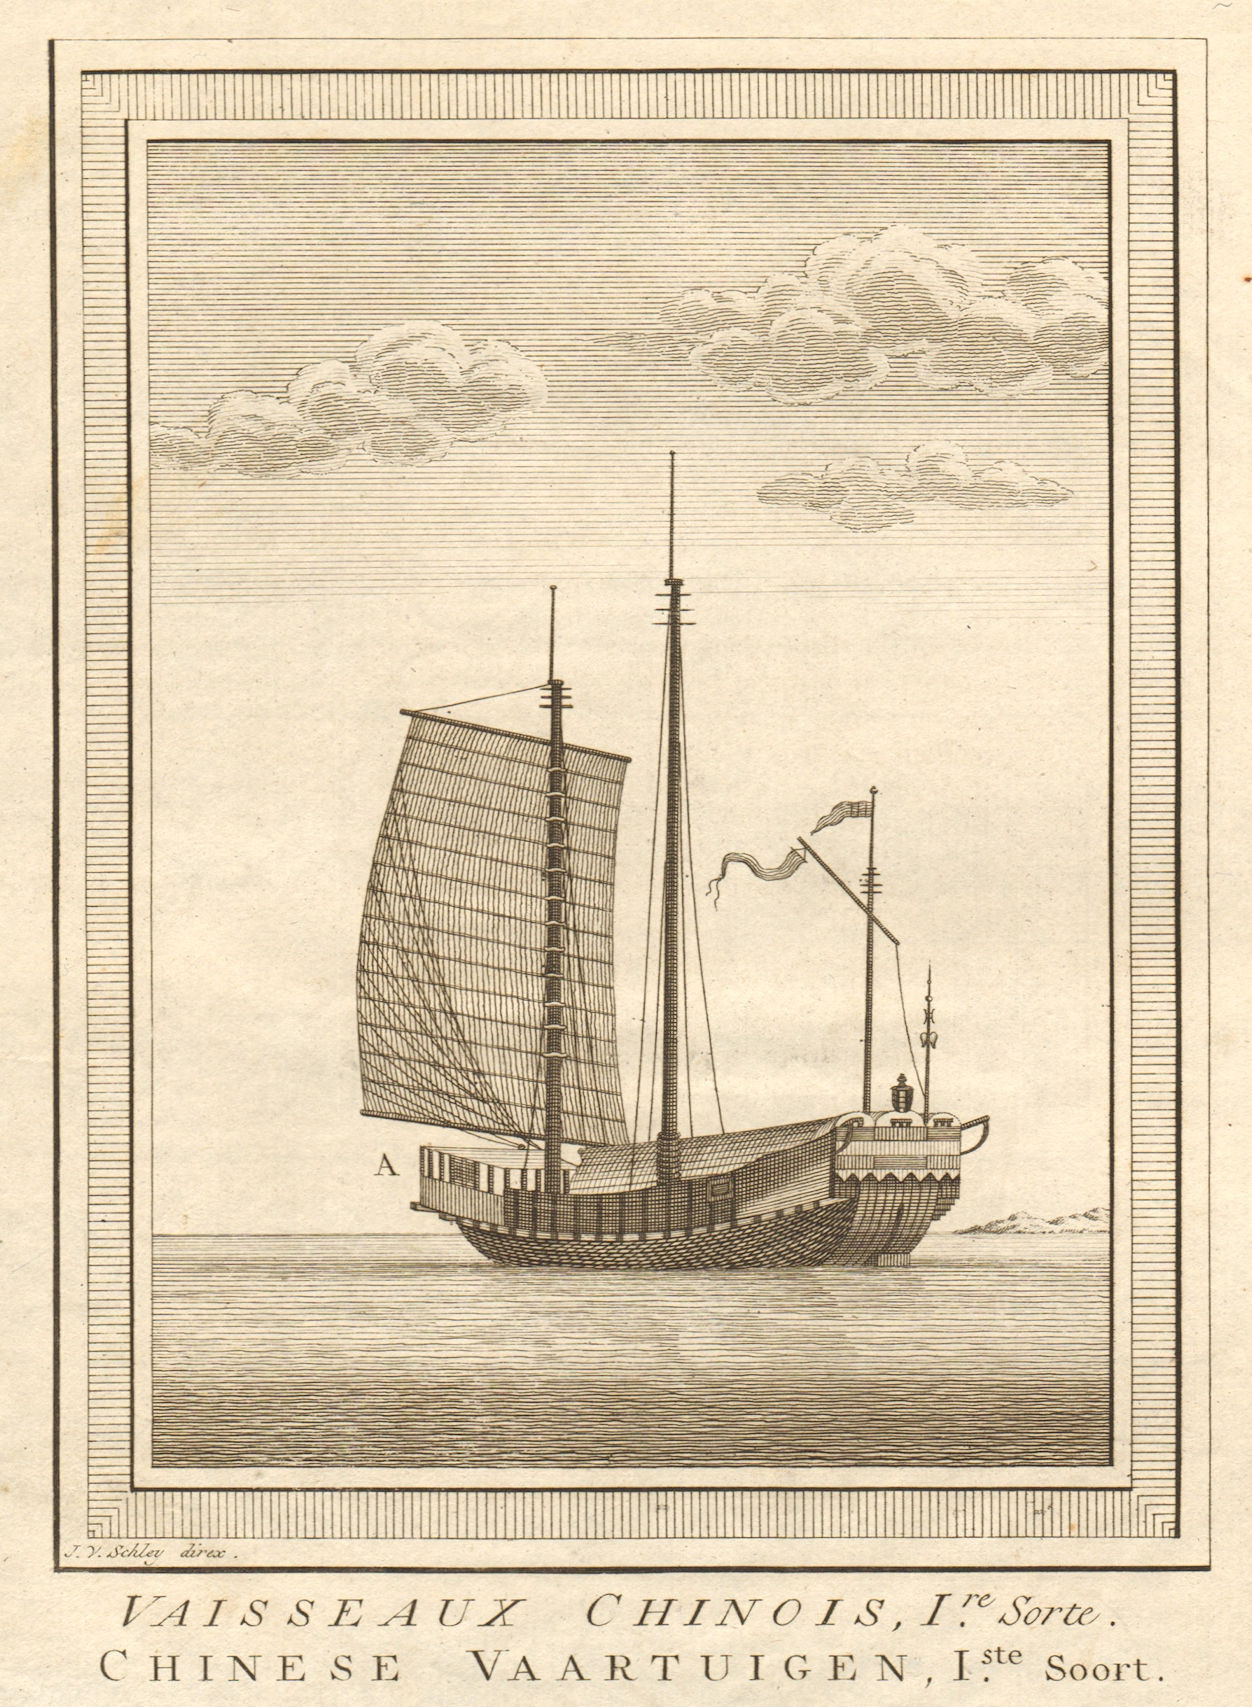 'Vaisseaux Chinois, I.re Sorte'. China. Chinese junks boats ships. SCHLEY 1757